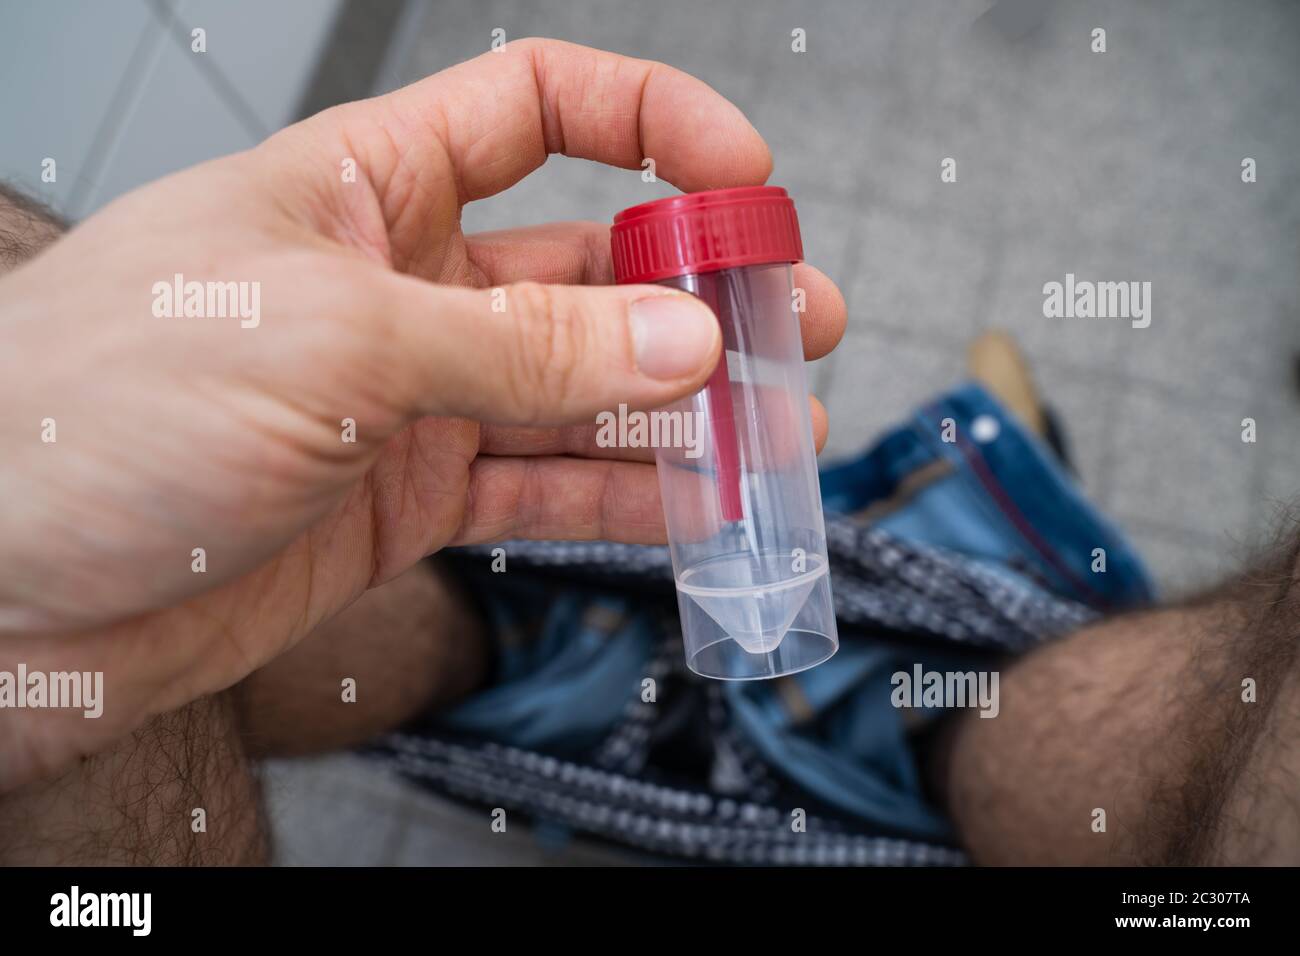 Stool Sample Container In Hands Of Man Sitting On Toilet Stock Photo